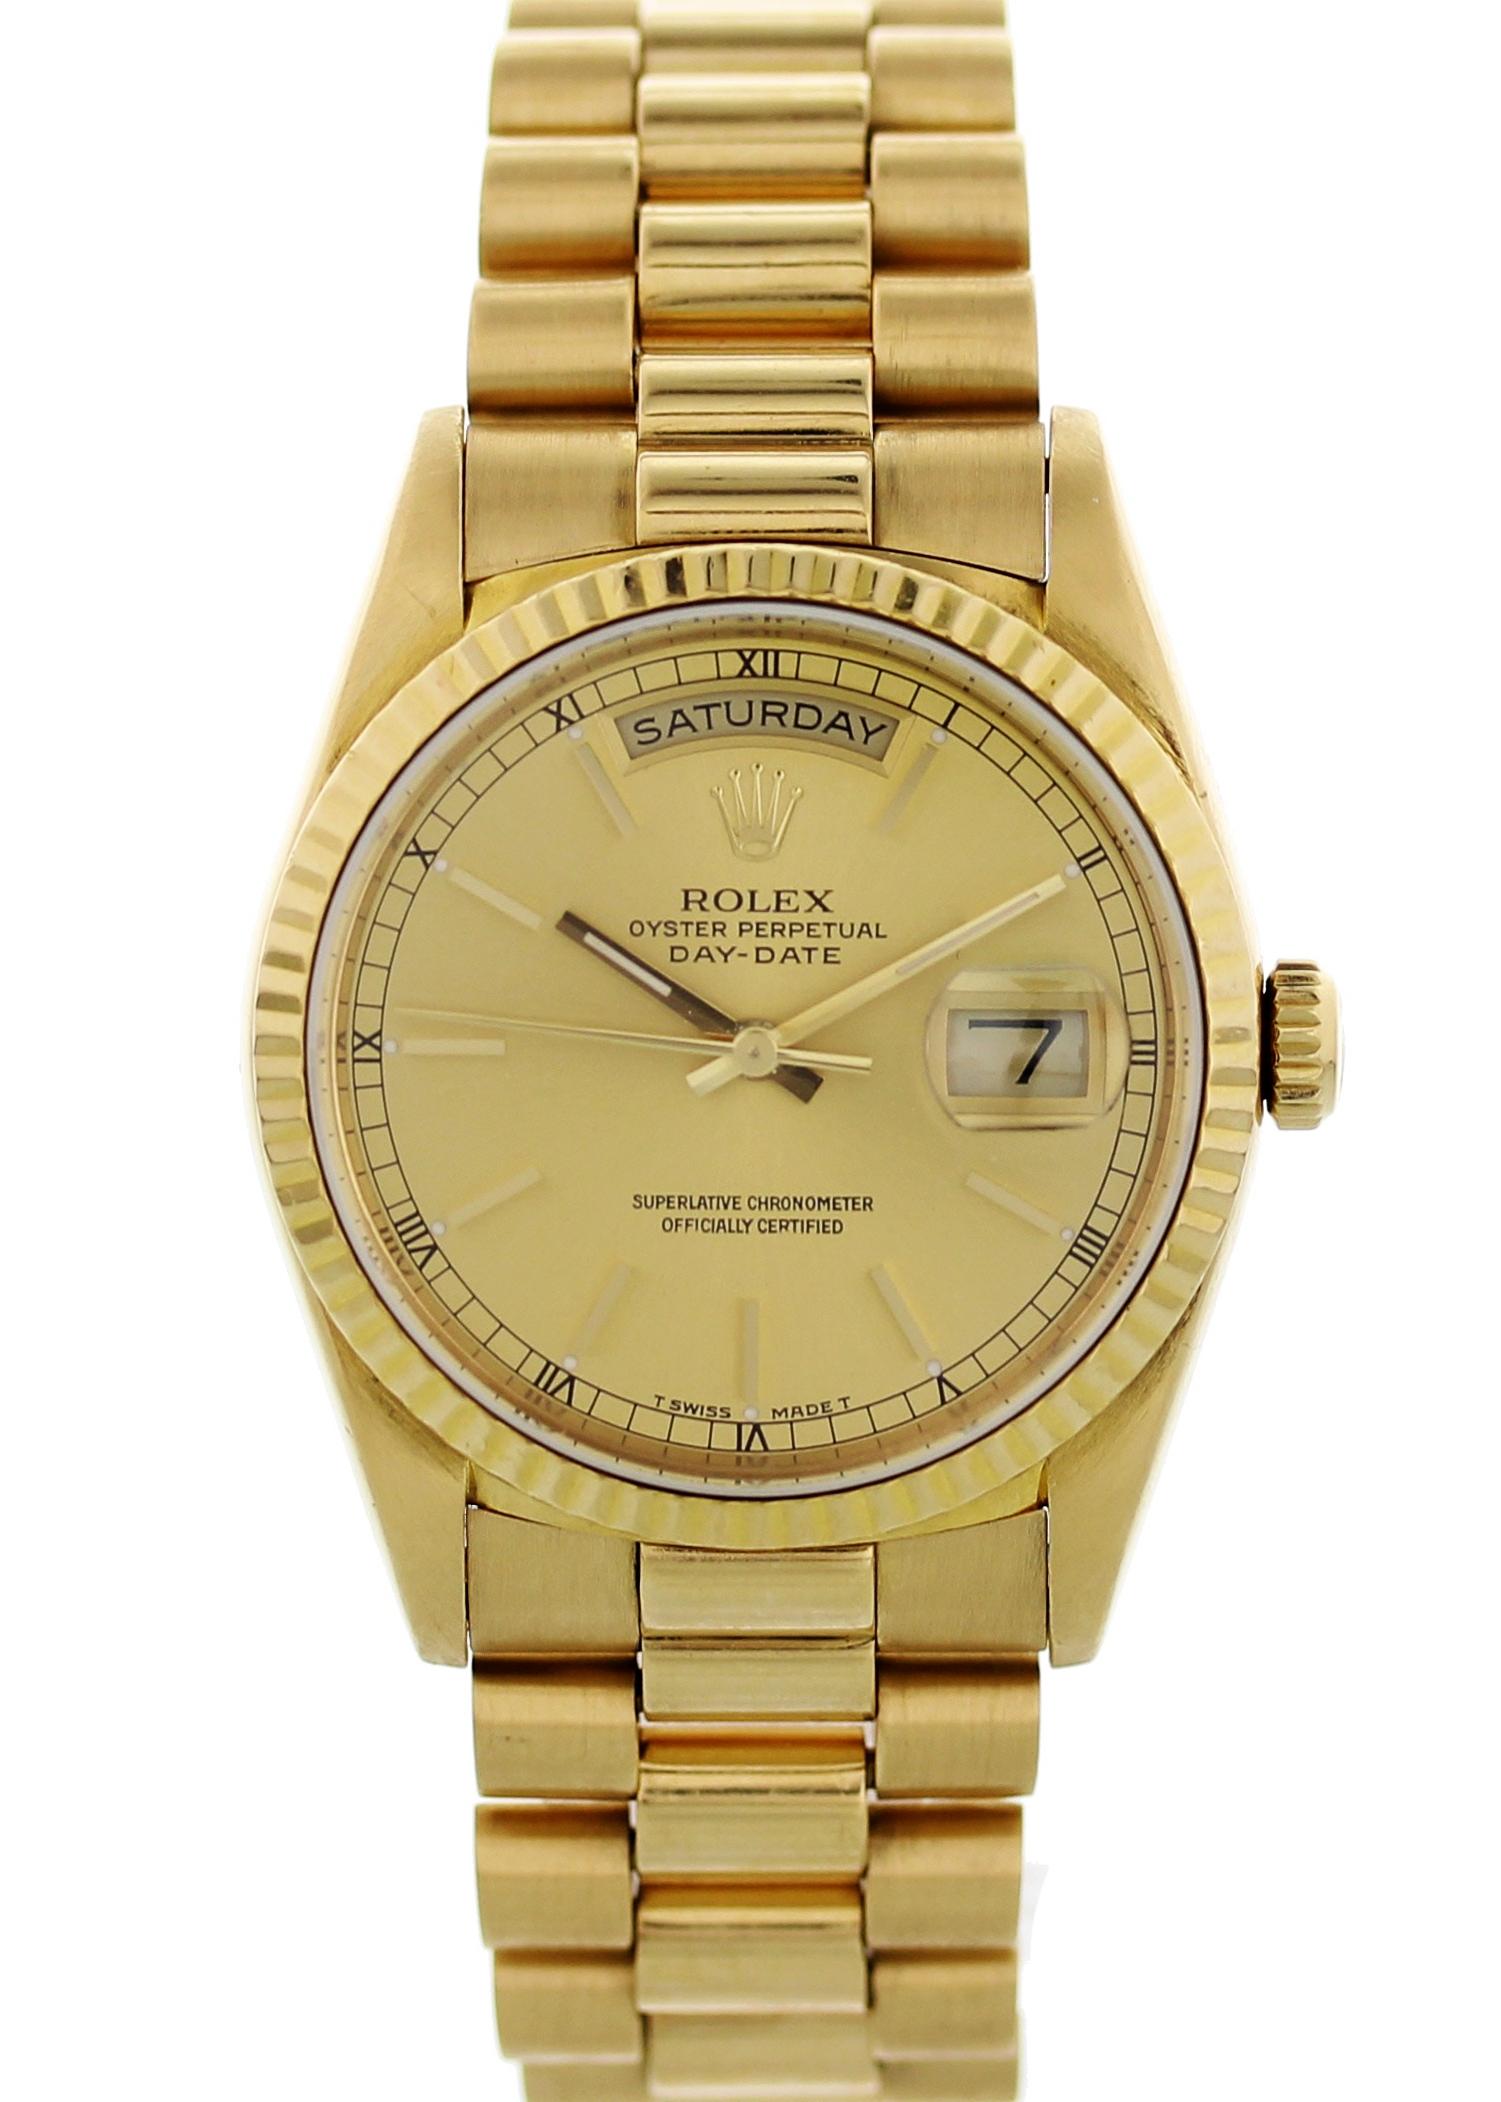 Rolex Oyster Perpetual Day-Date President 18238 Mens Watch. 36 mm 18k yellow gold case. 18k yellow gold stationary fluted bezel. Champagne dial luminous hands and indexes. Day display at 12 0'clock. Date display at 3 0'clock. Double quickset.